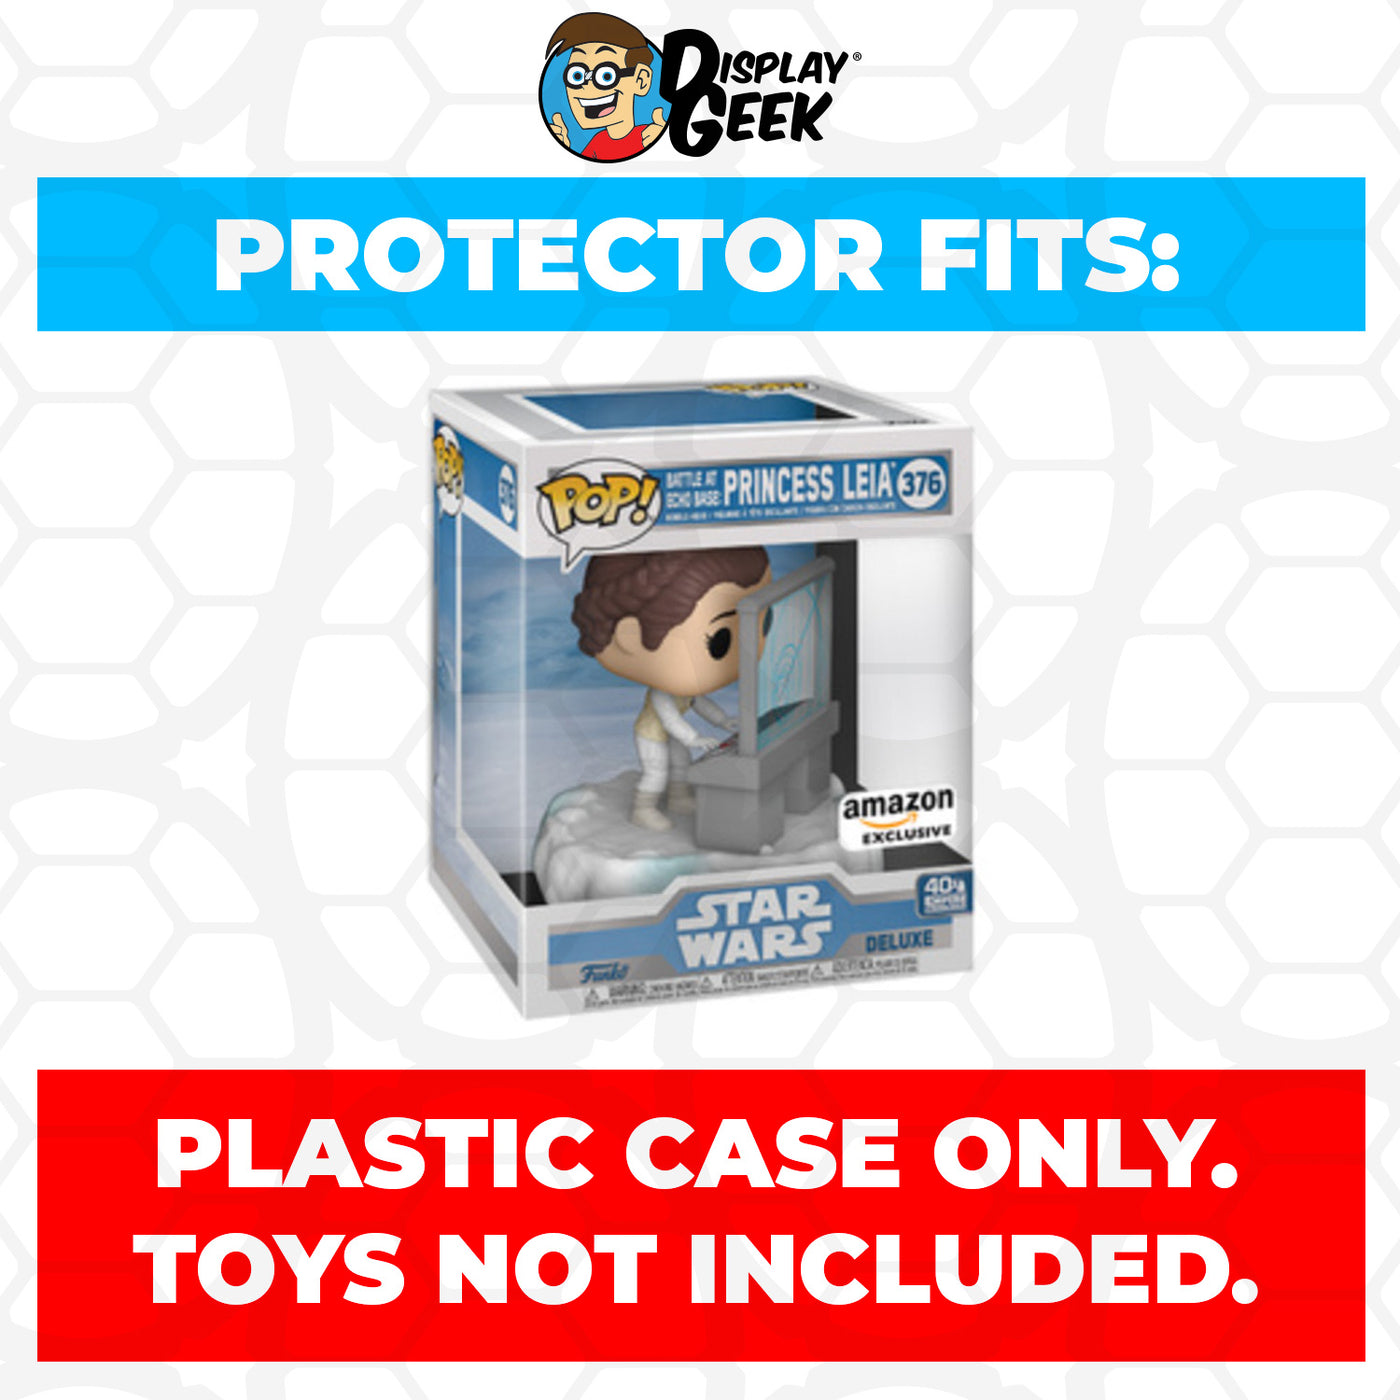 Pop Protector for Battle at Echo Base Princess Leia #376 Funko Pop Deluxe on The Protector Guide App by Display Geek